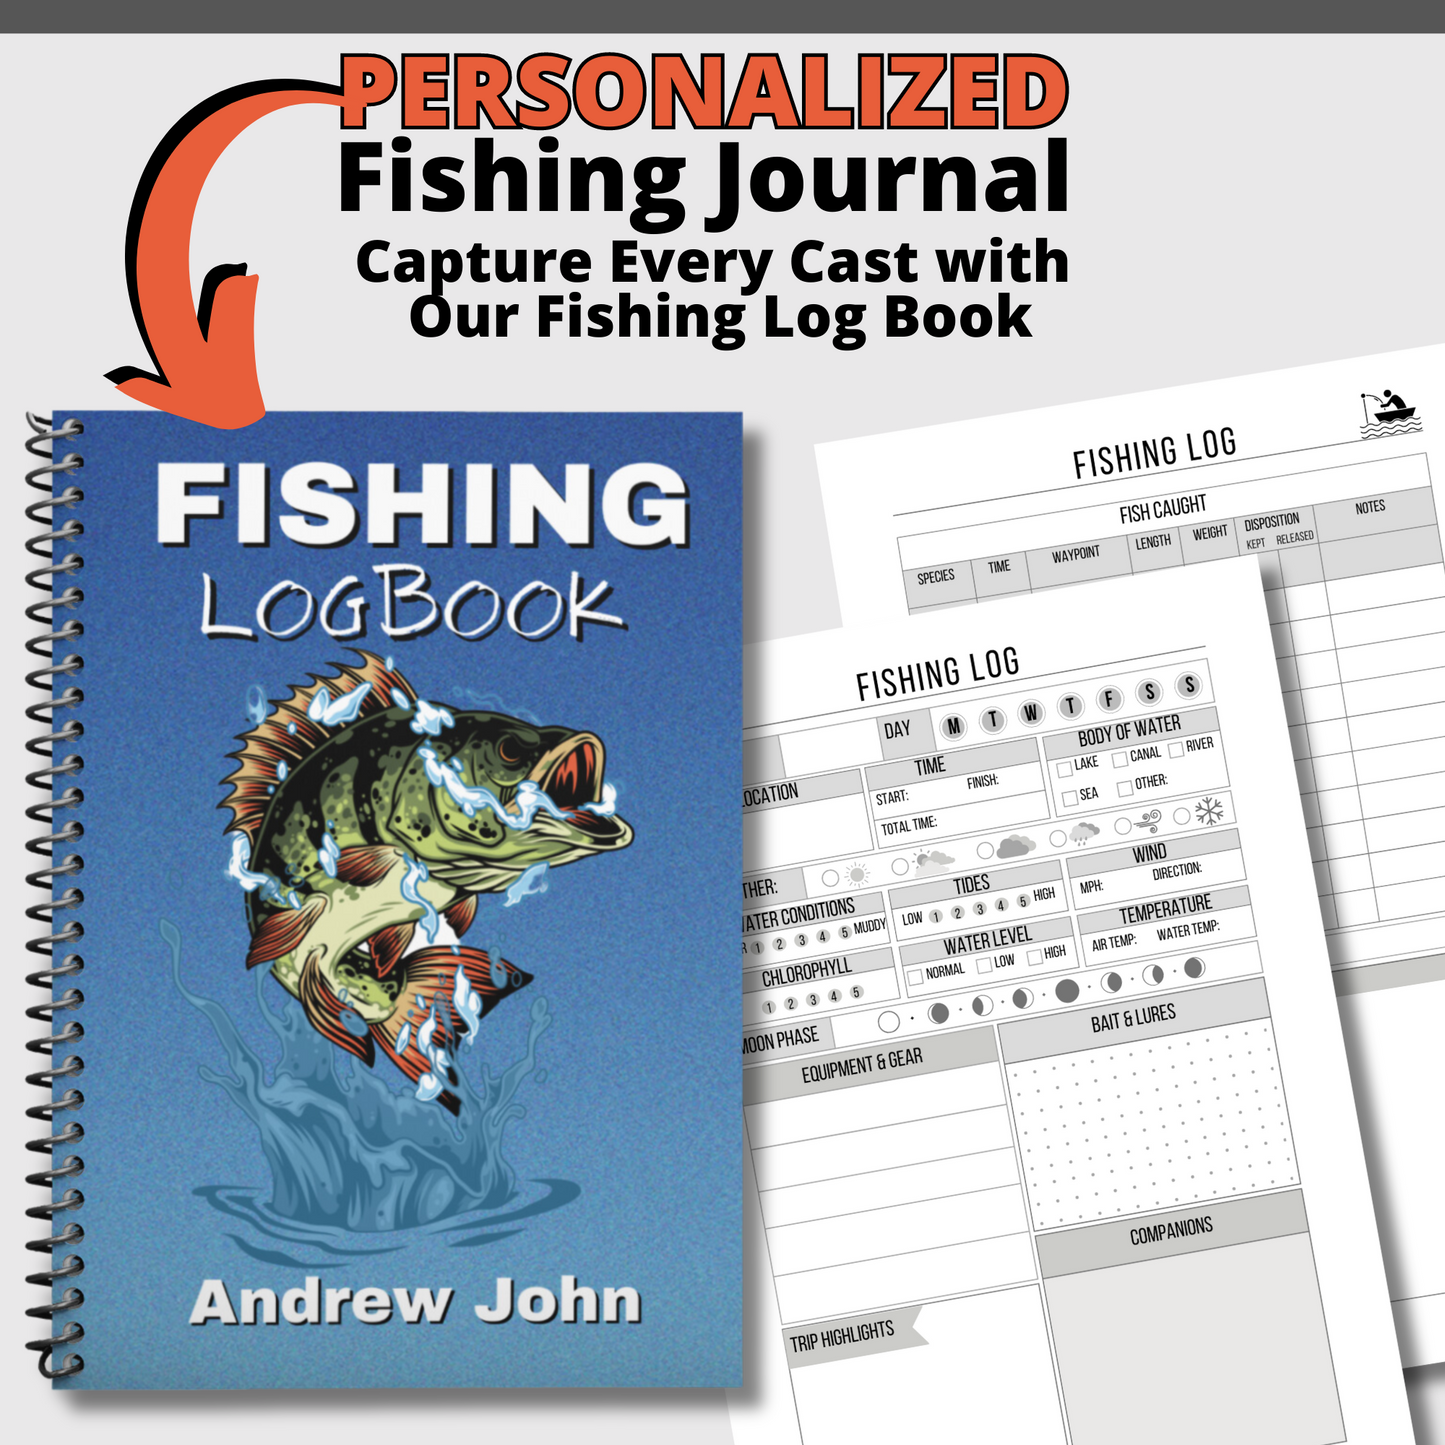 Fishing Log Book: Keep Track of Your Fishing Locations, Companions,  Weather, Equipment, Lures, Hot Spots, and the Species of Fish You've  Caught, All in One Organized Place Vol-1 (Paperback) 